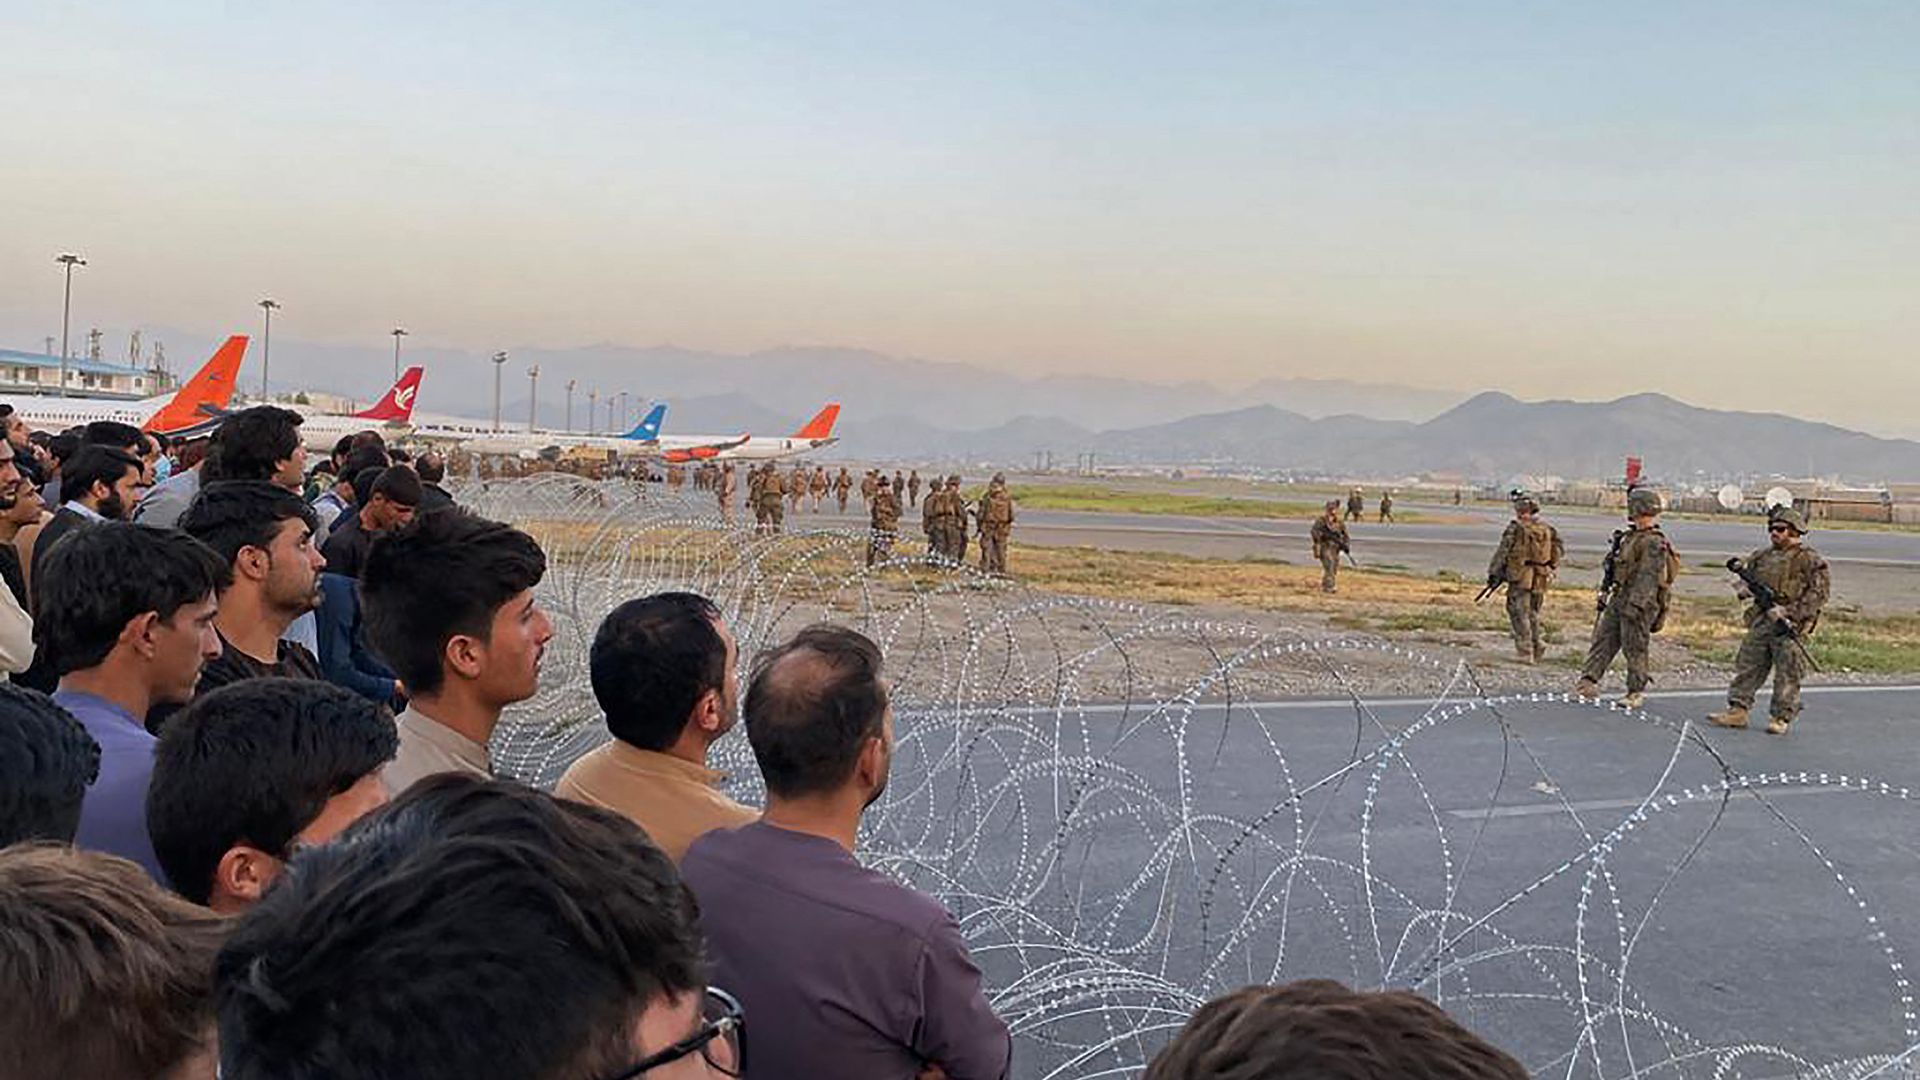 Afghans crowd at the airport as US soldiers stand guard in Kabul on August 16, 2021.